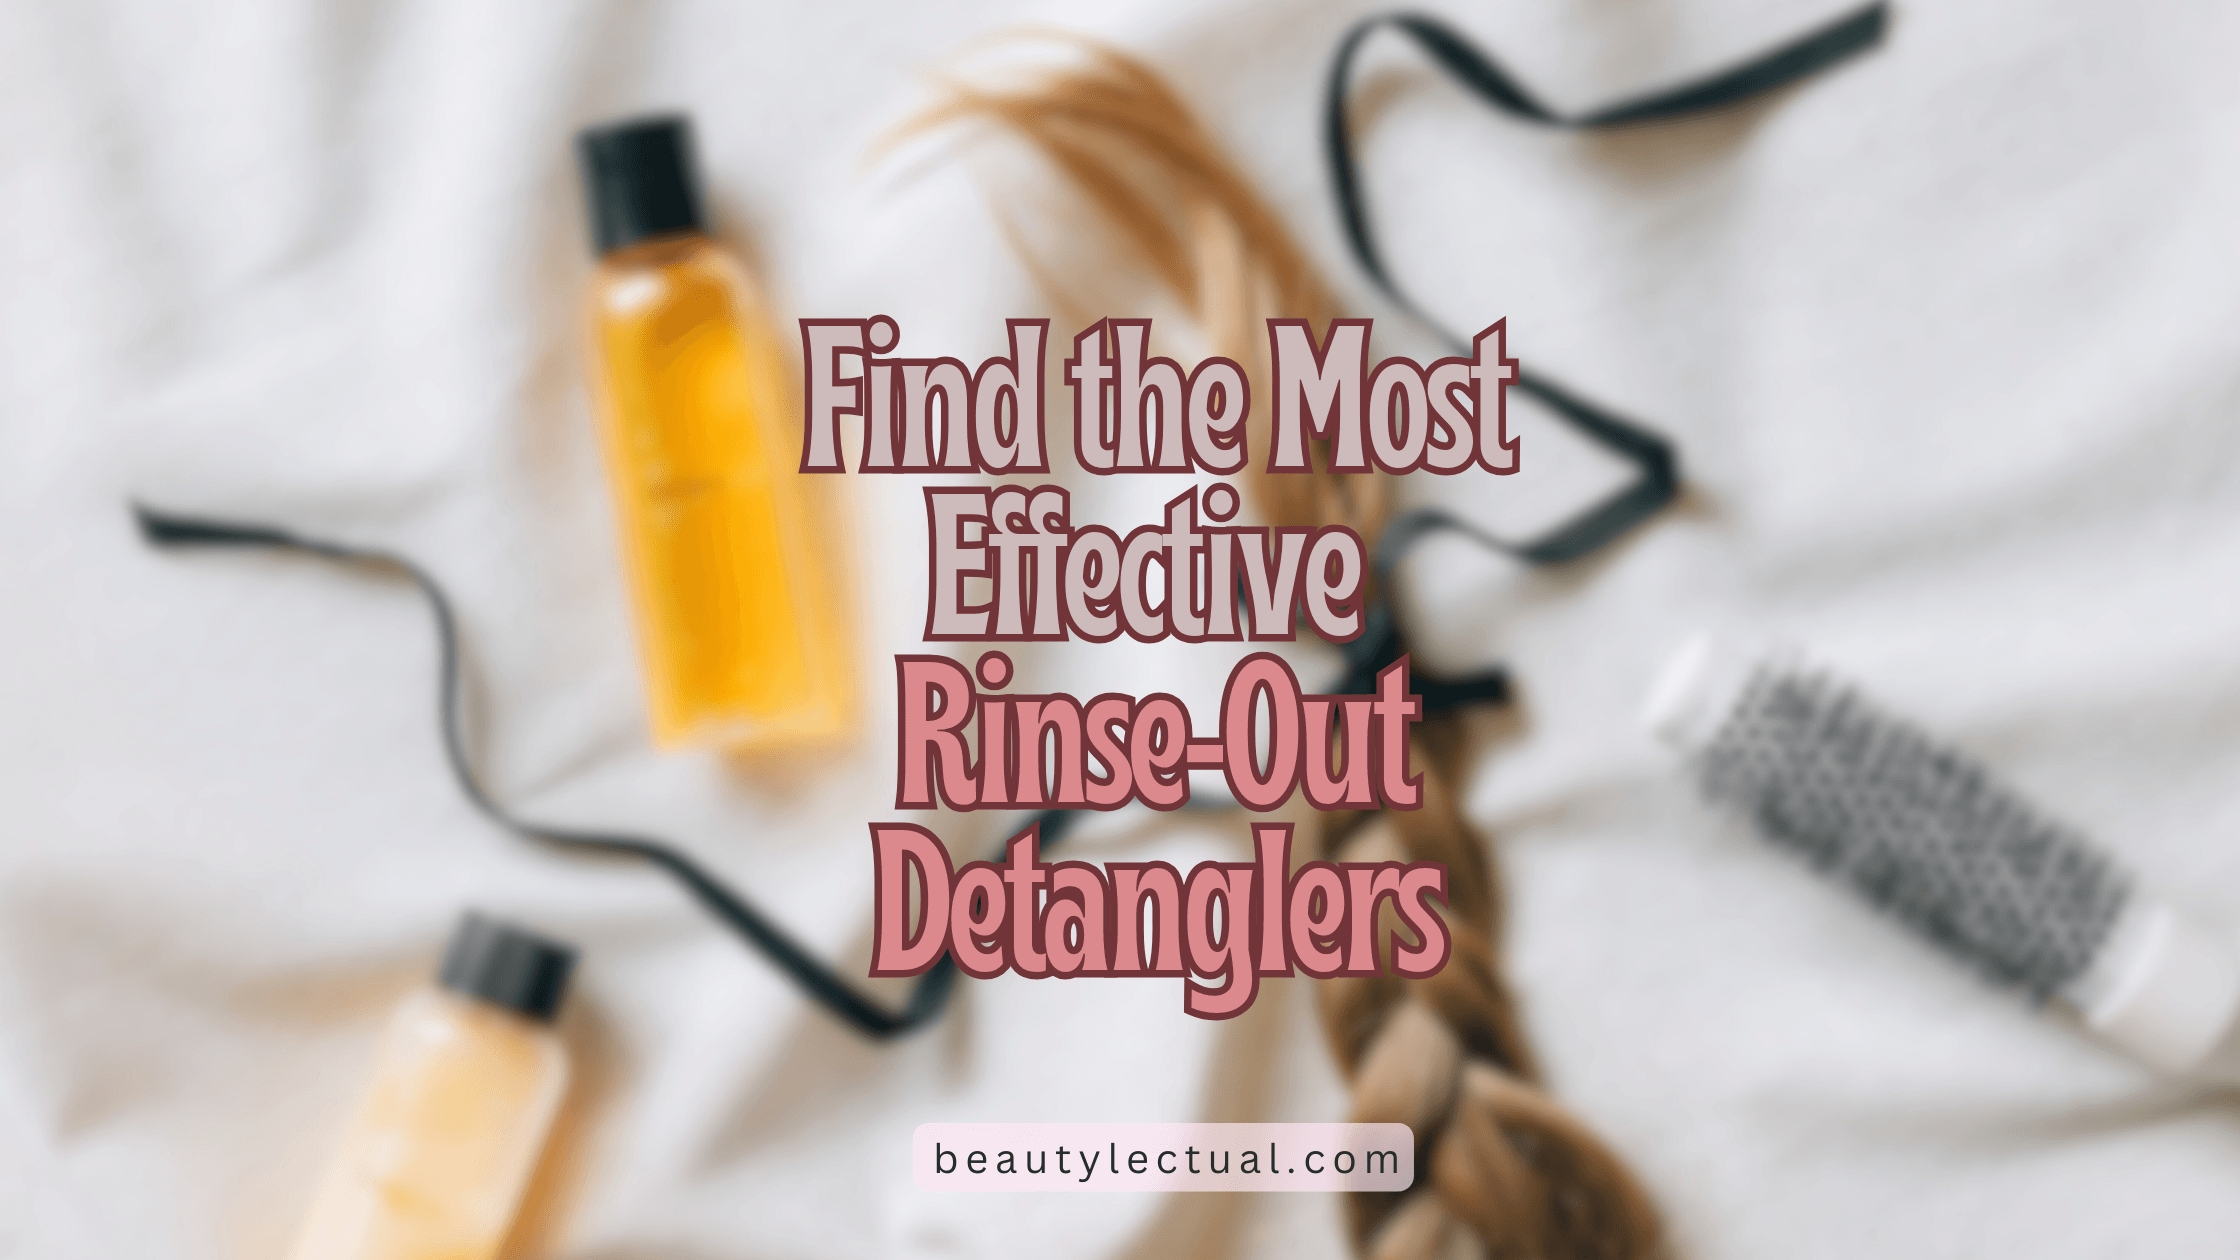 Find the Most Effective Rinse-Out Detanglers